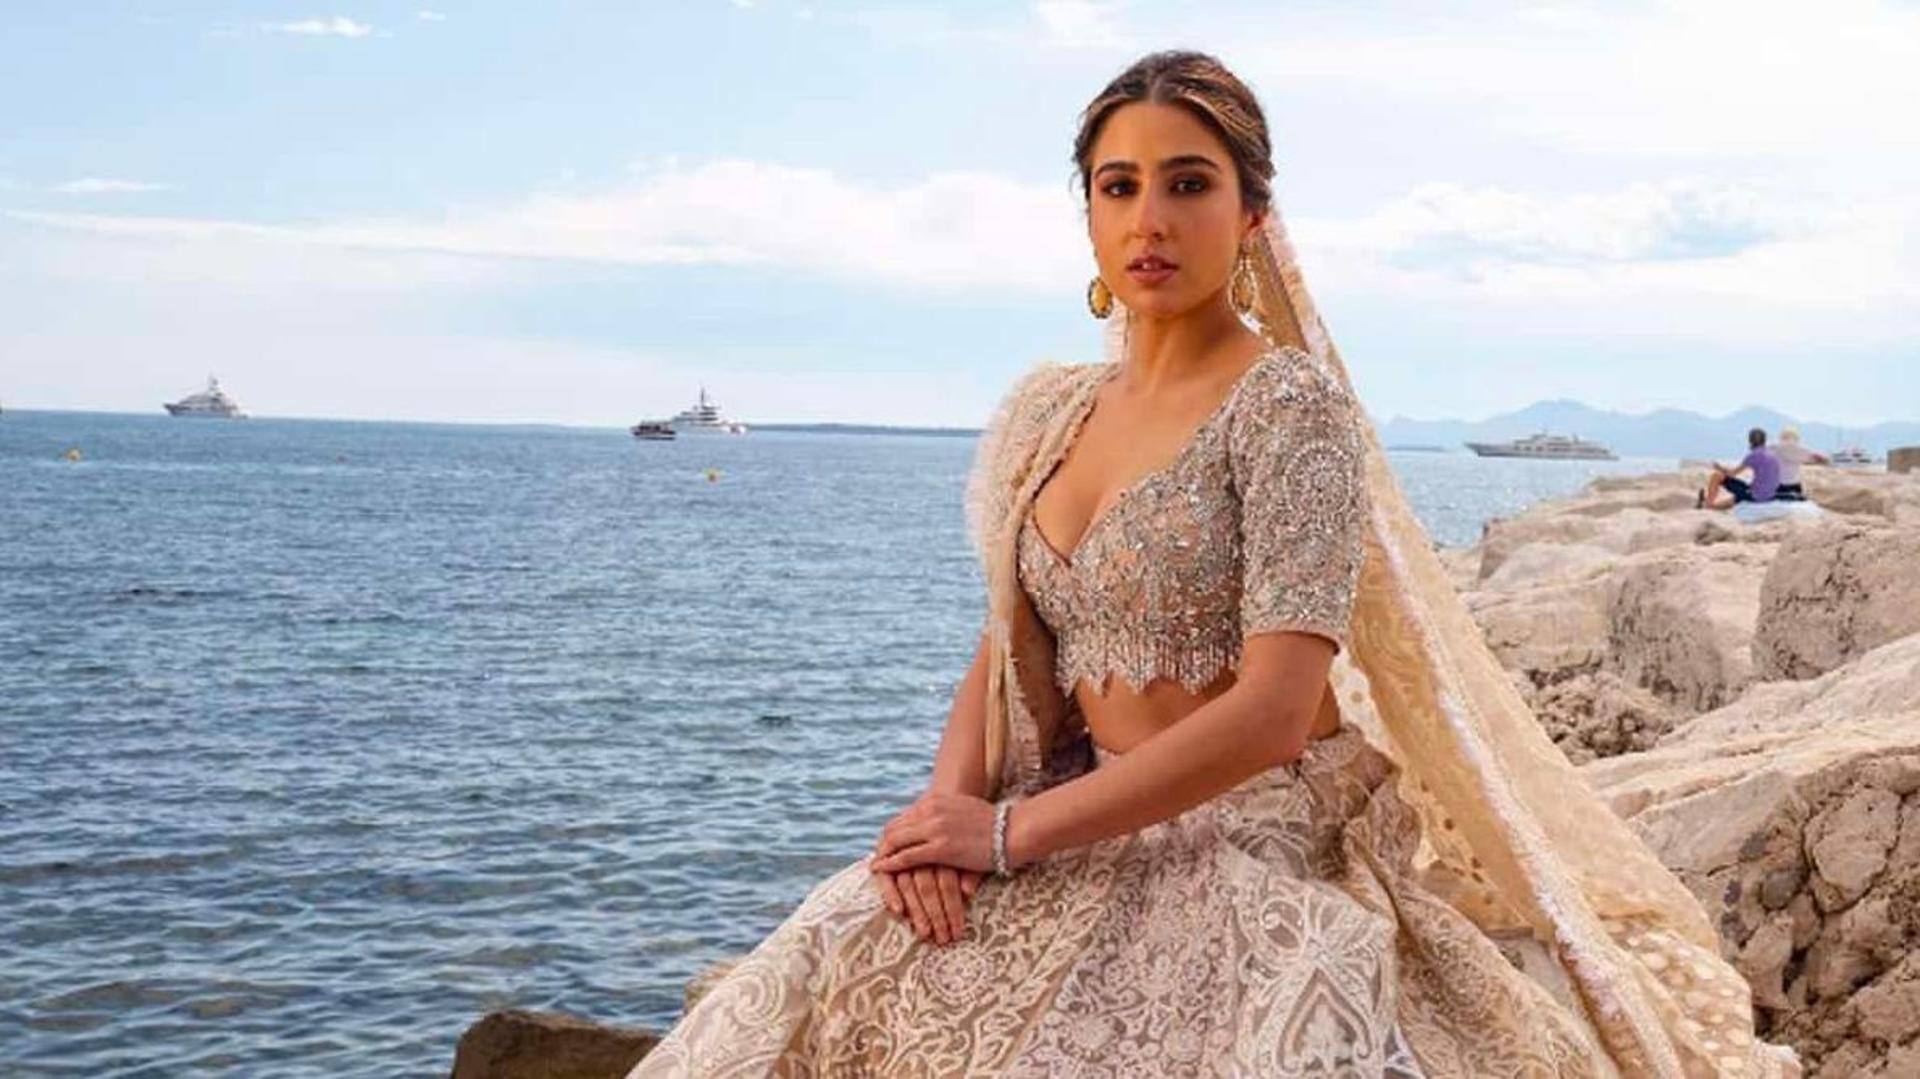 Sara's Cannes attire sparks criticism: Why Indians ridicule 'Indianness'